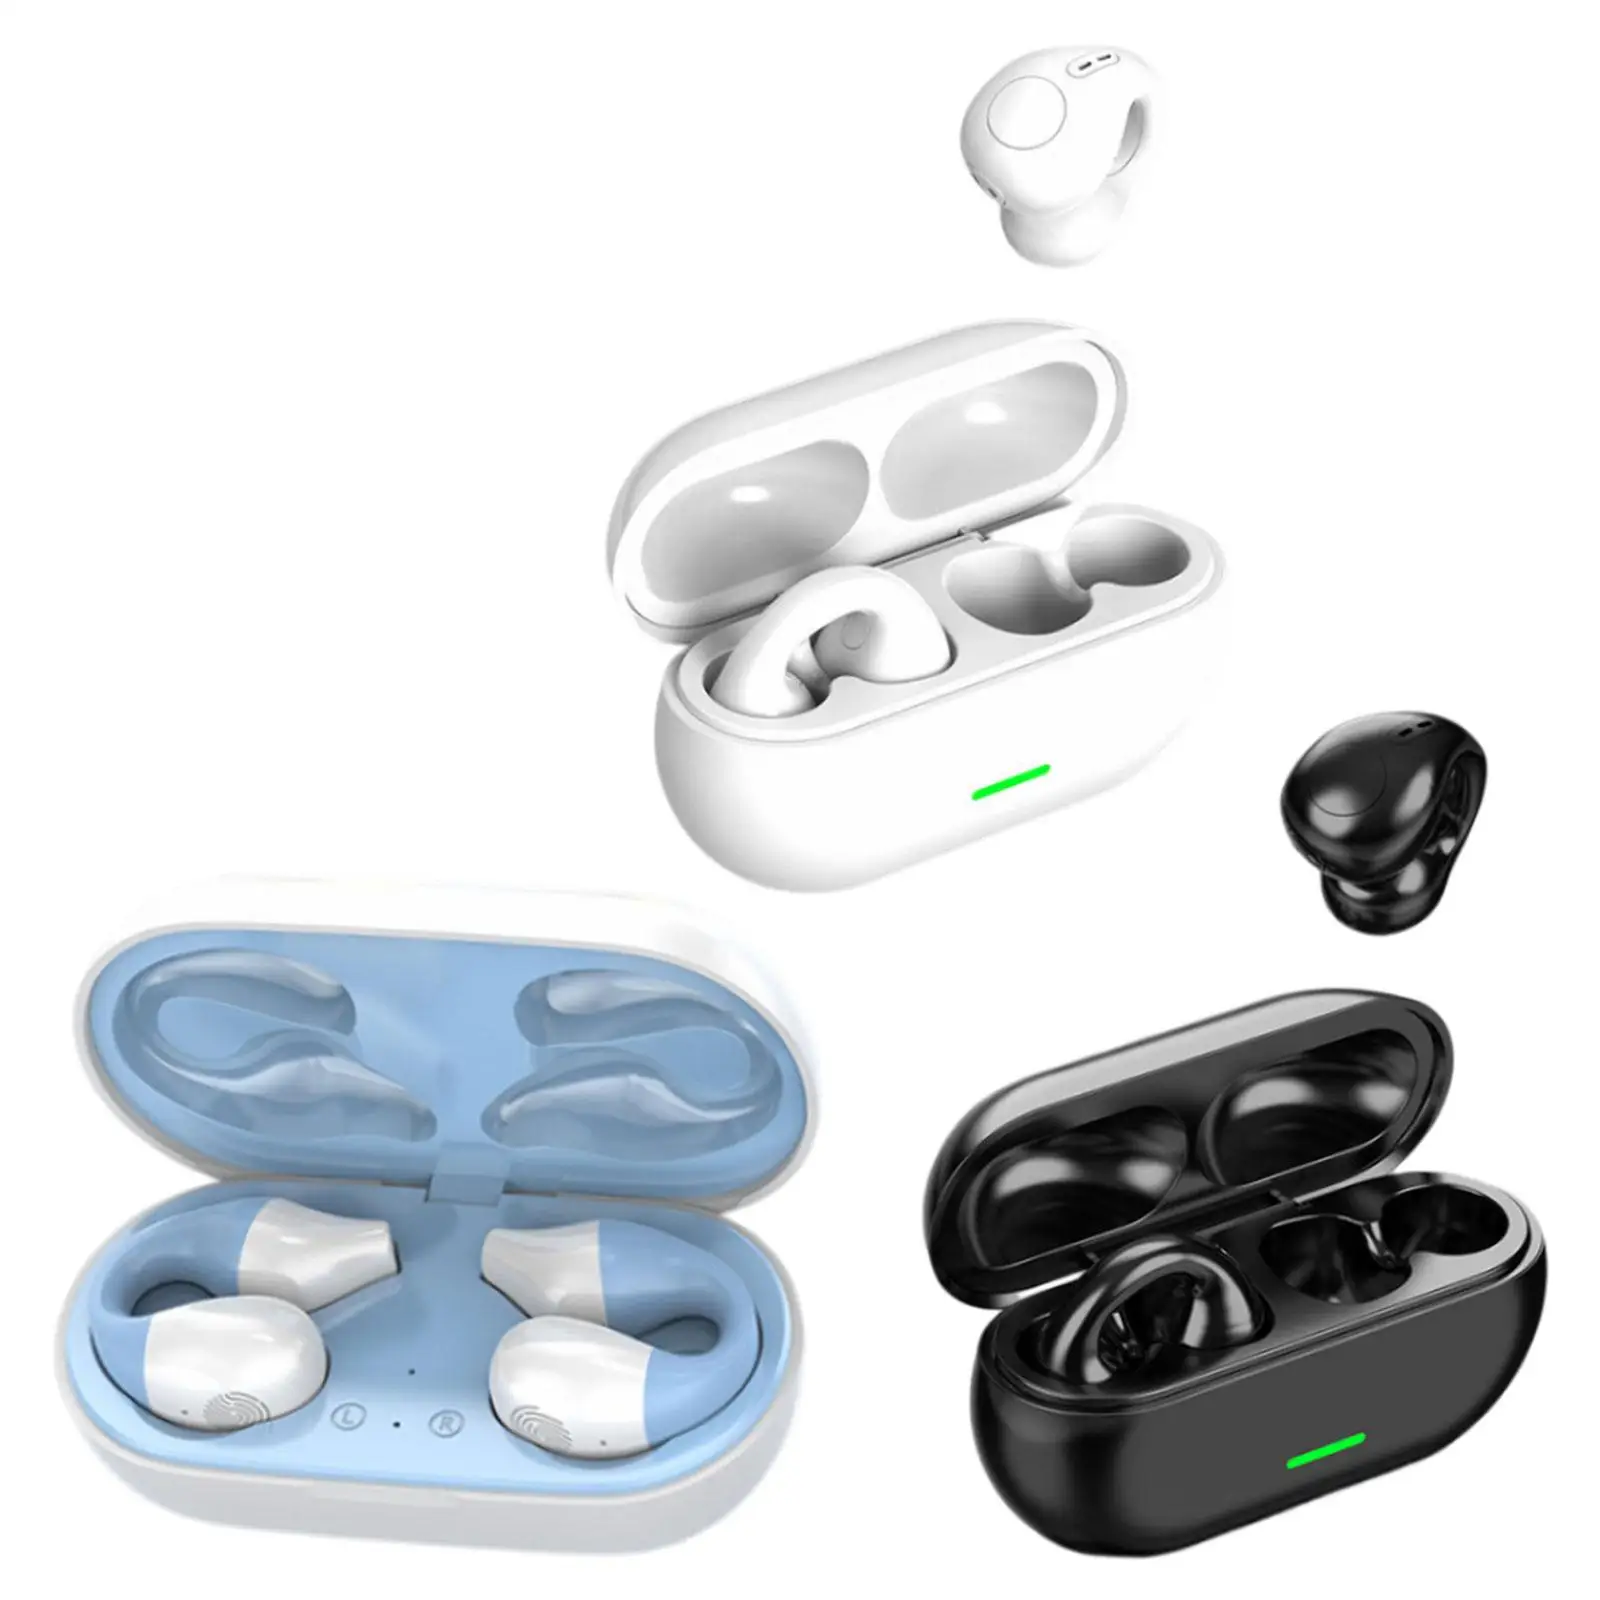 Air Conduction Headphones Touch Control HiFi Stereo Noise Reduction Low Latency Earpiece for Games Running Gym Sports